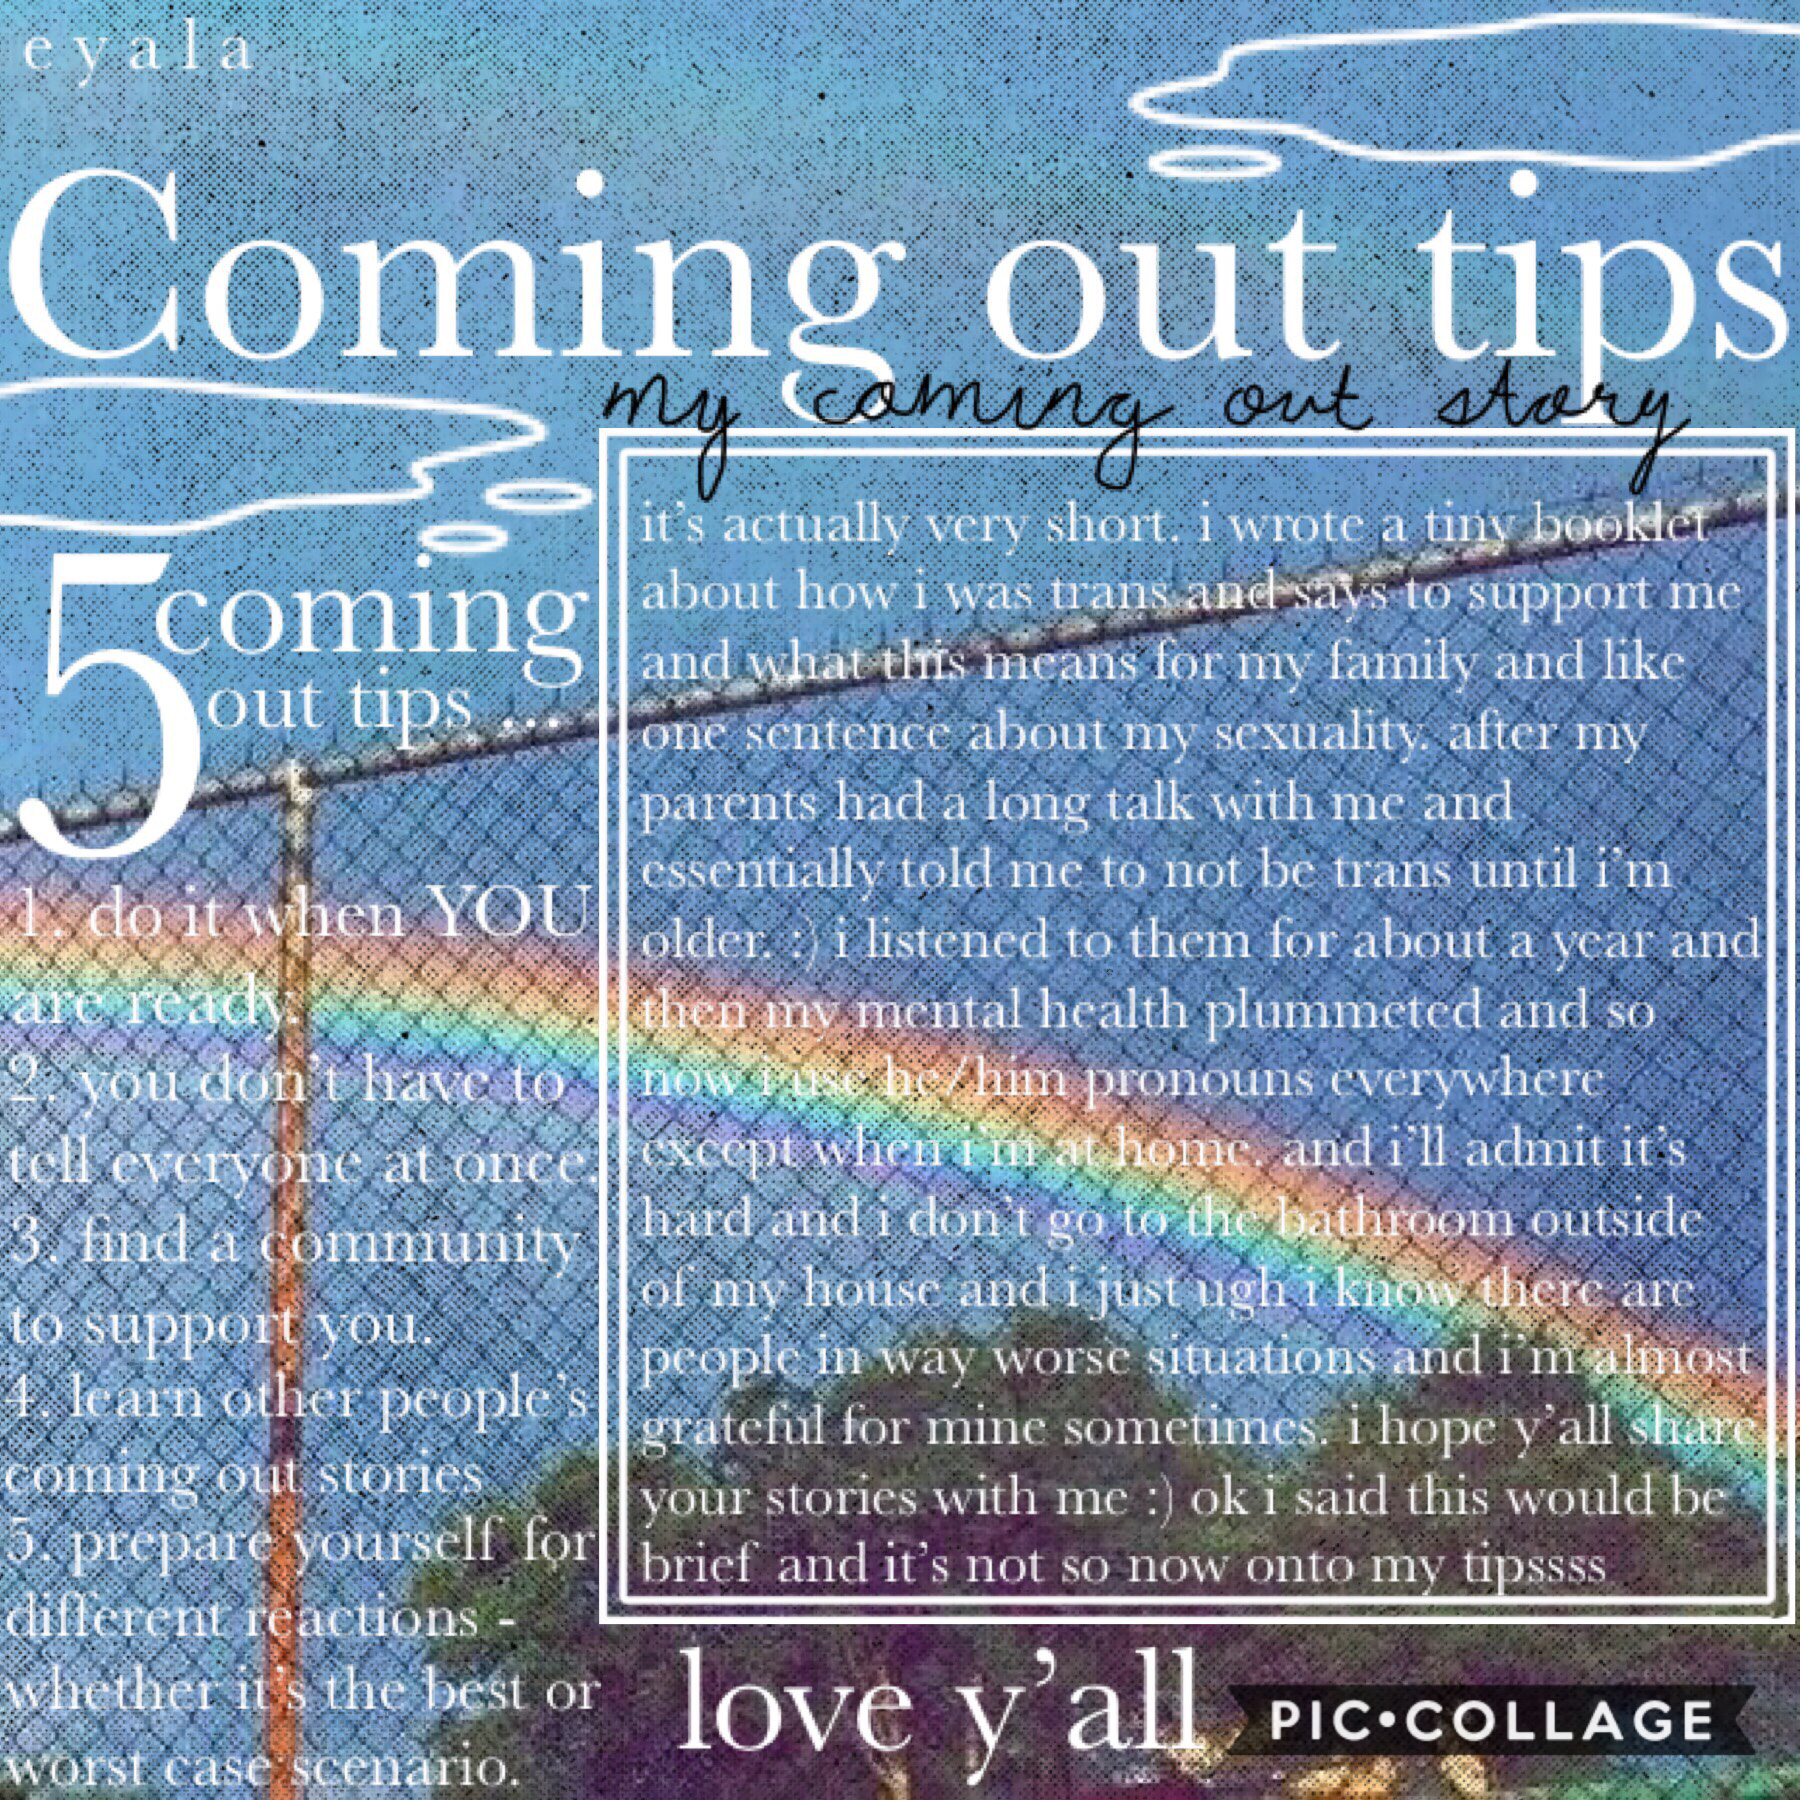 t a p

this was very hard for me to write for some reason i usually don’t talk about how i came out. i might do separate posts about transitioning and passing. 

-please stop self advertising on my acc, thank you-

💕much love 💕 